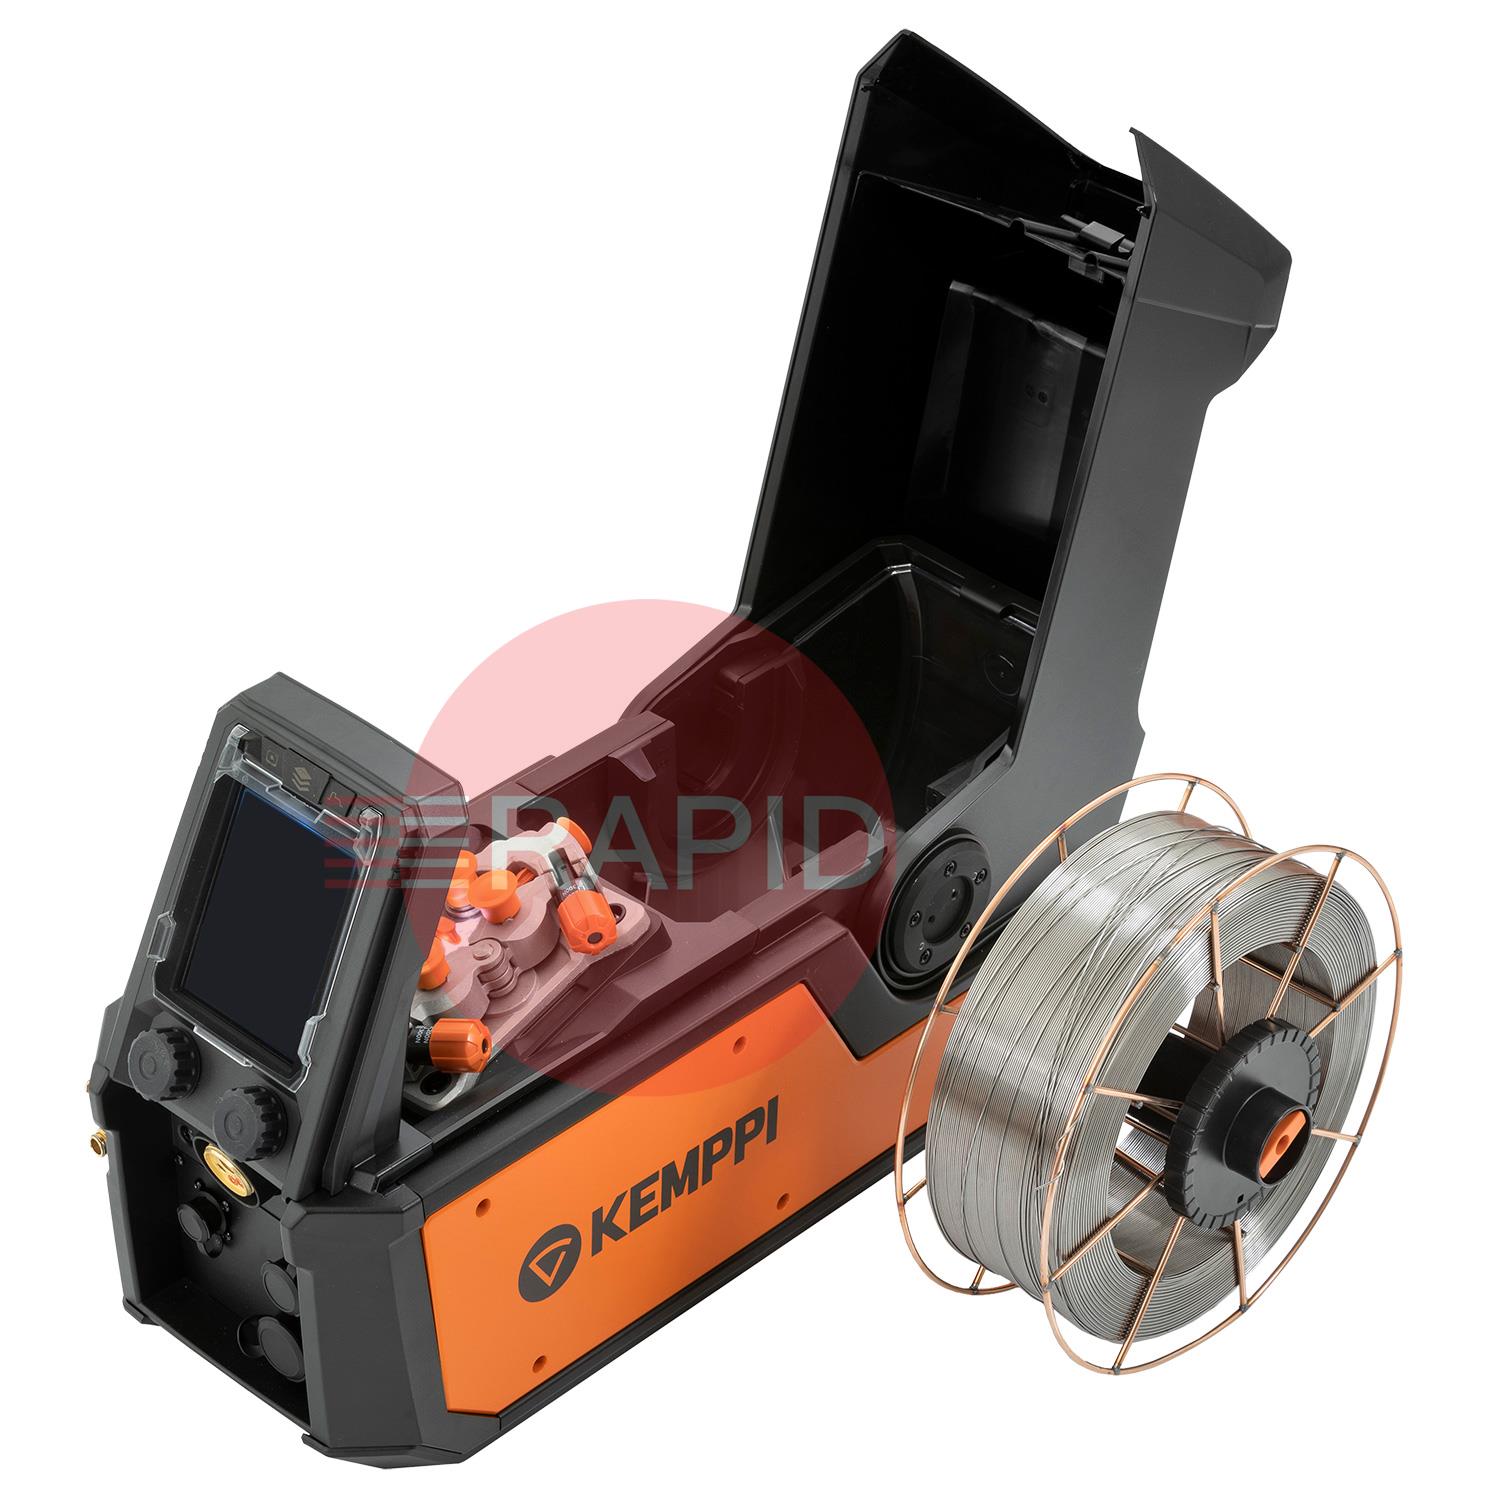 X5110500010SPKWC  Kemppi X5 FastMig 500 Synergic Water Cooled MIG Package, with GXe 505W 3.5m Torch - 400v, 3ph